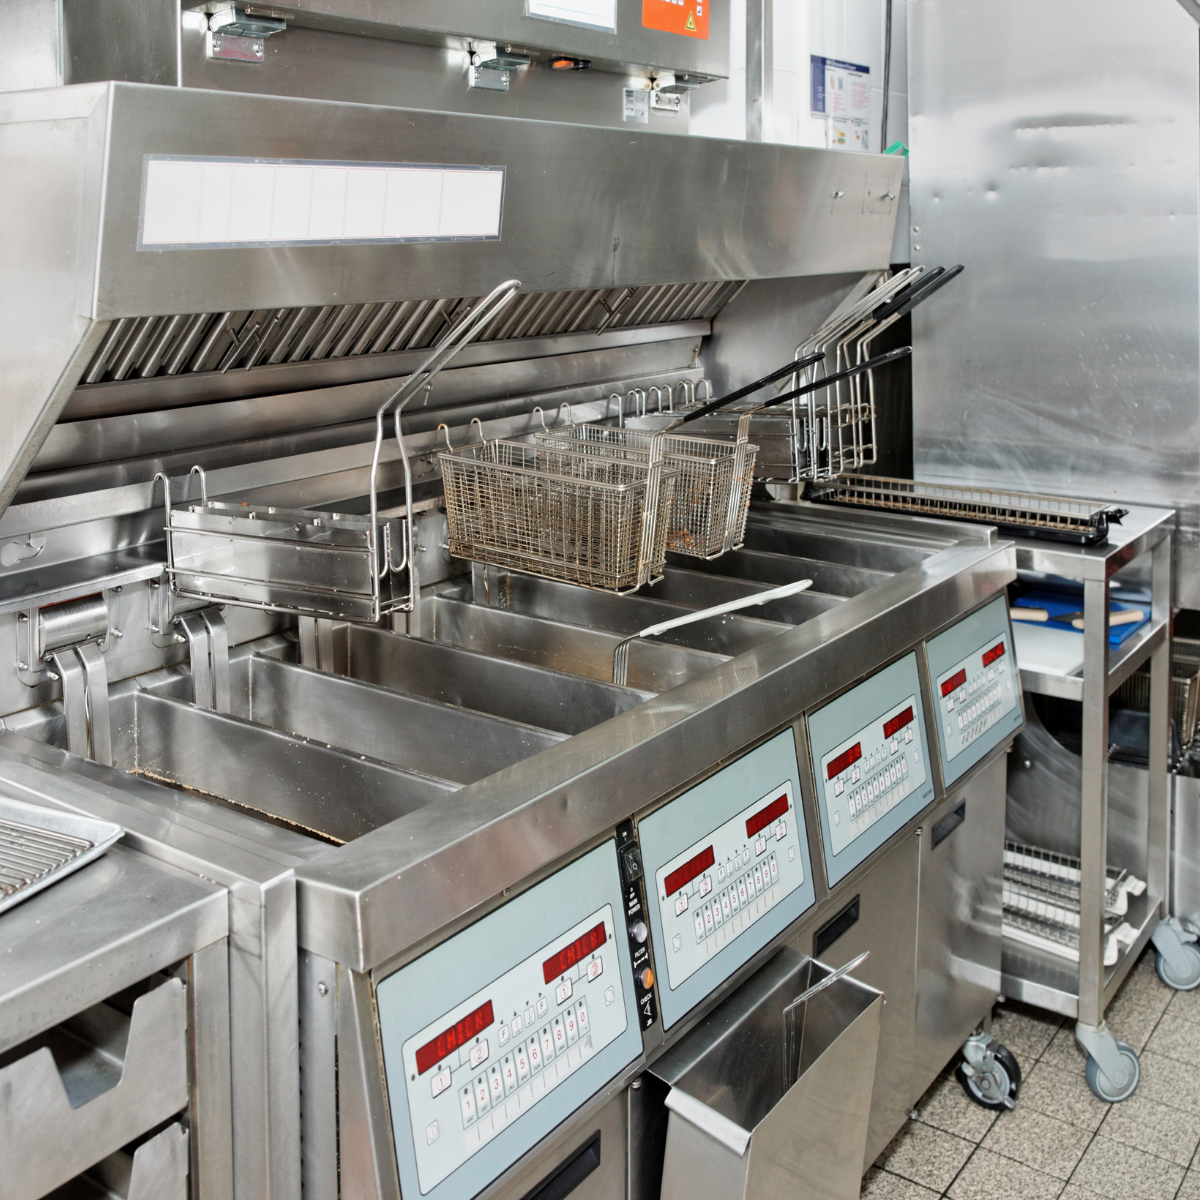 Commercial Deep Fryer Safety Tips